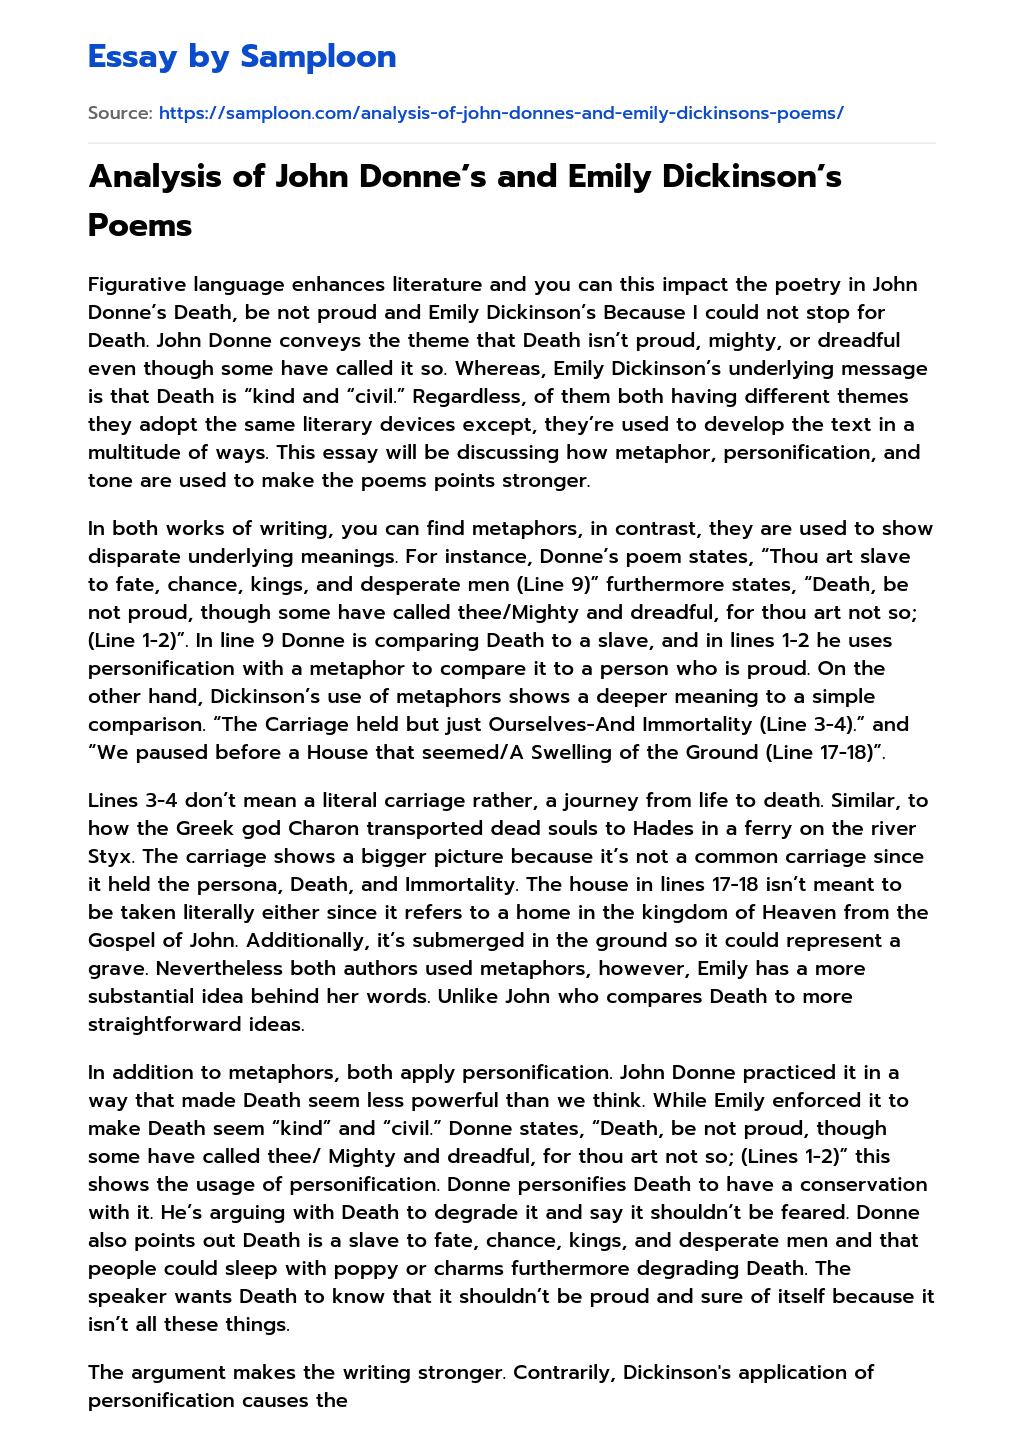 Analysis of John Donne’s and Emily Dickinson’s Poems essay